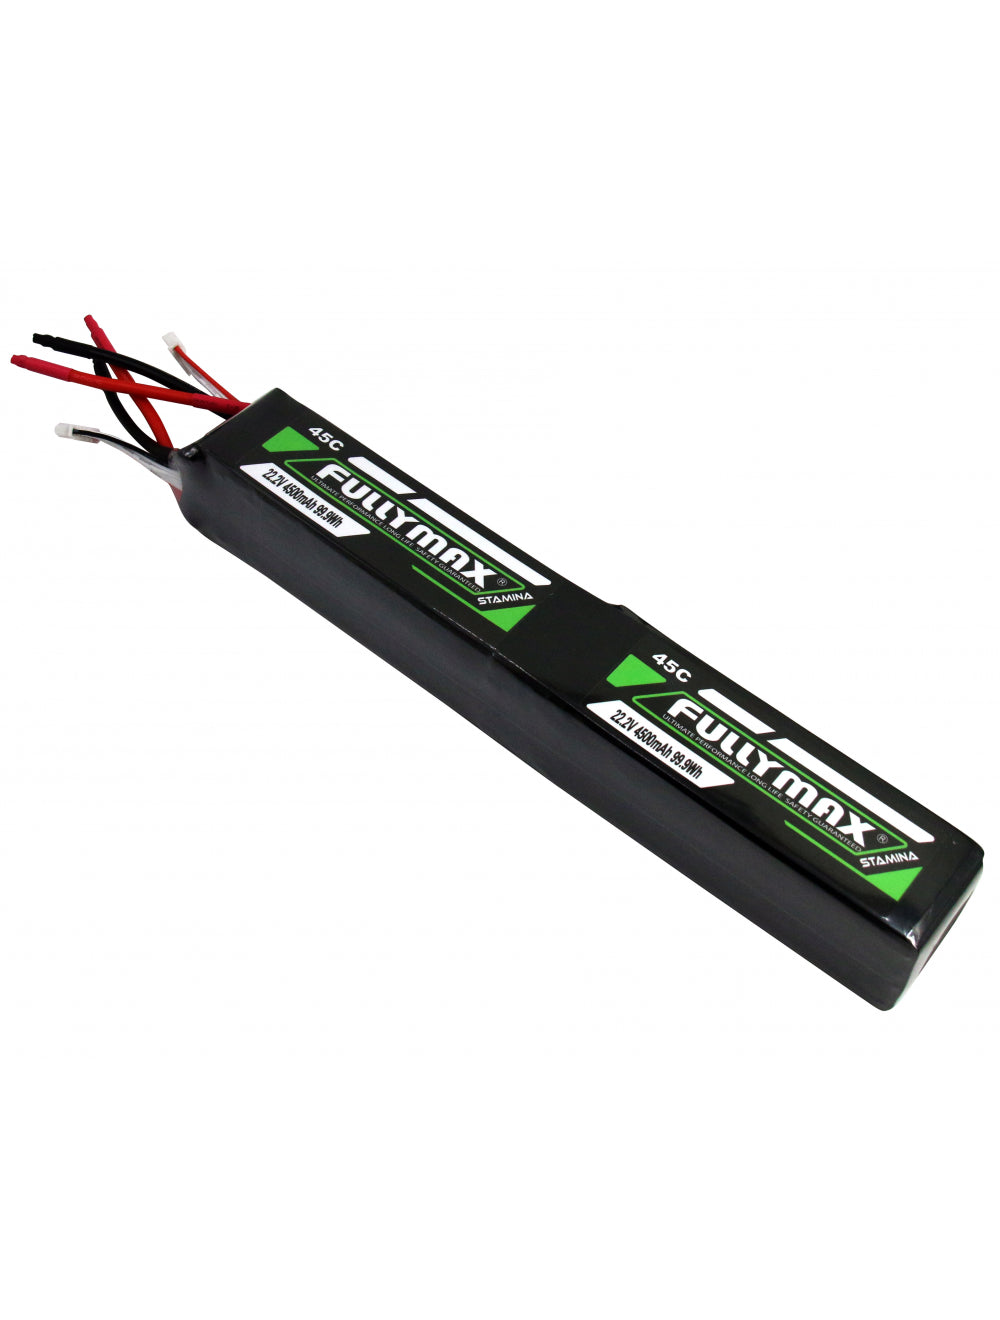 Overlander Fullymax 4500mAh 22.2V (x2) 12S 45C LiPo Battery - Deans Connector 3447